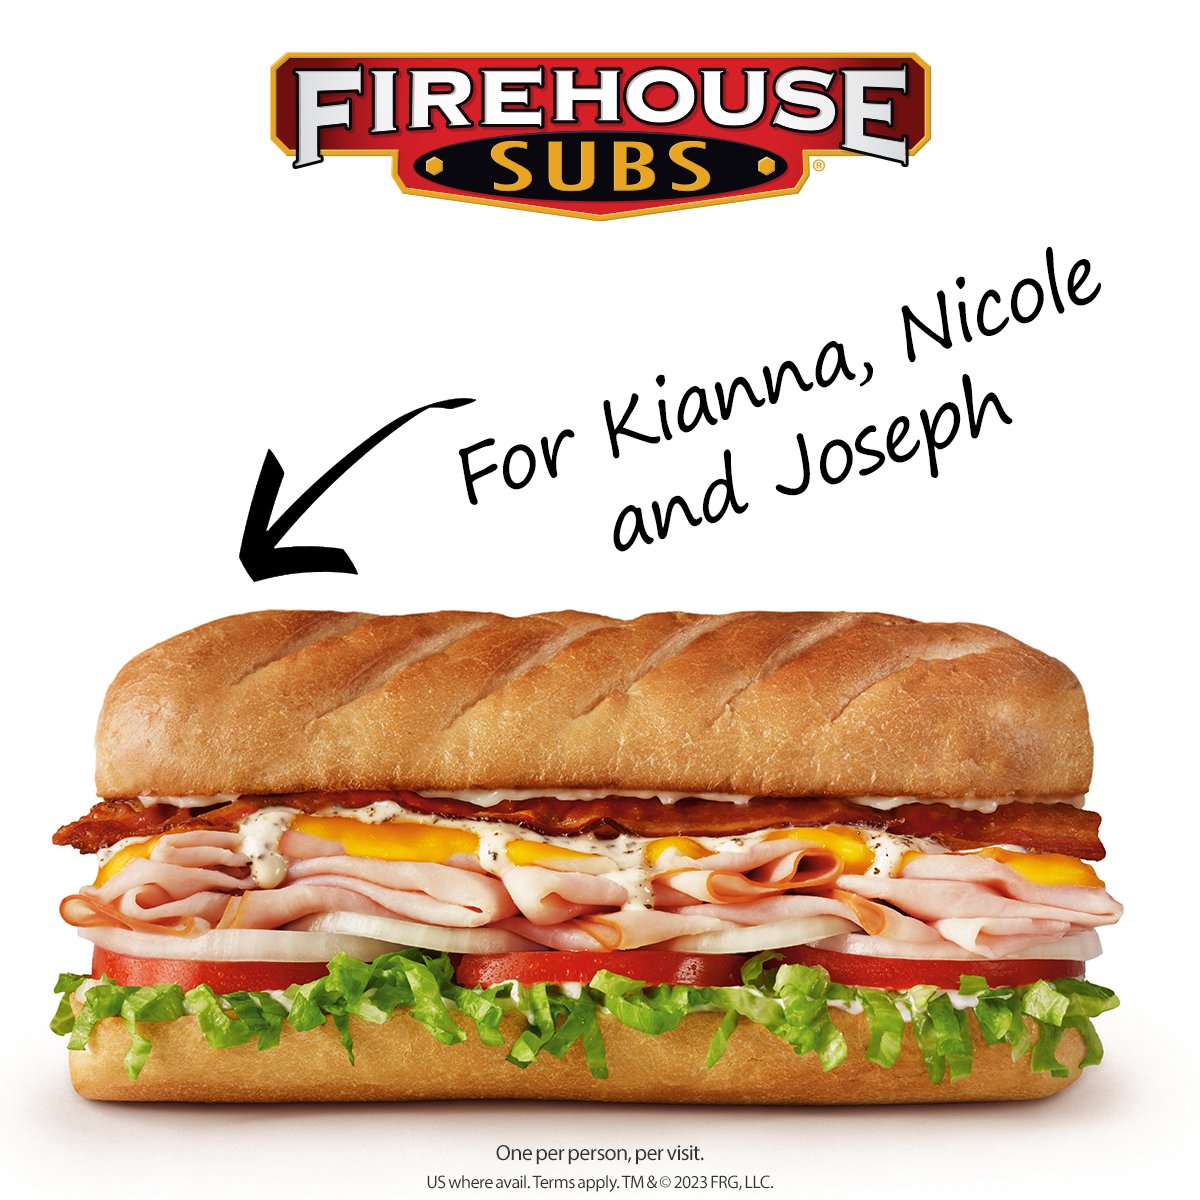 Today, we're showing some love to Kianna, Nicole and Joseph 😀

If that's your first name, show your photo ID at any U.S. Firehouse Subs TODAY, 6/22, and get a FREE medium sub with any purchase!

New name tomorrow, so be sure to check here: firehousesubs.com/nameoftheday